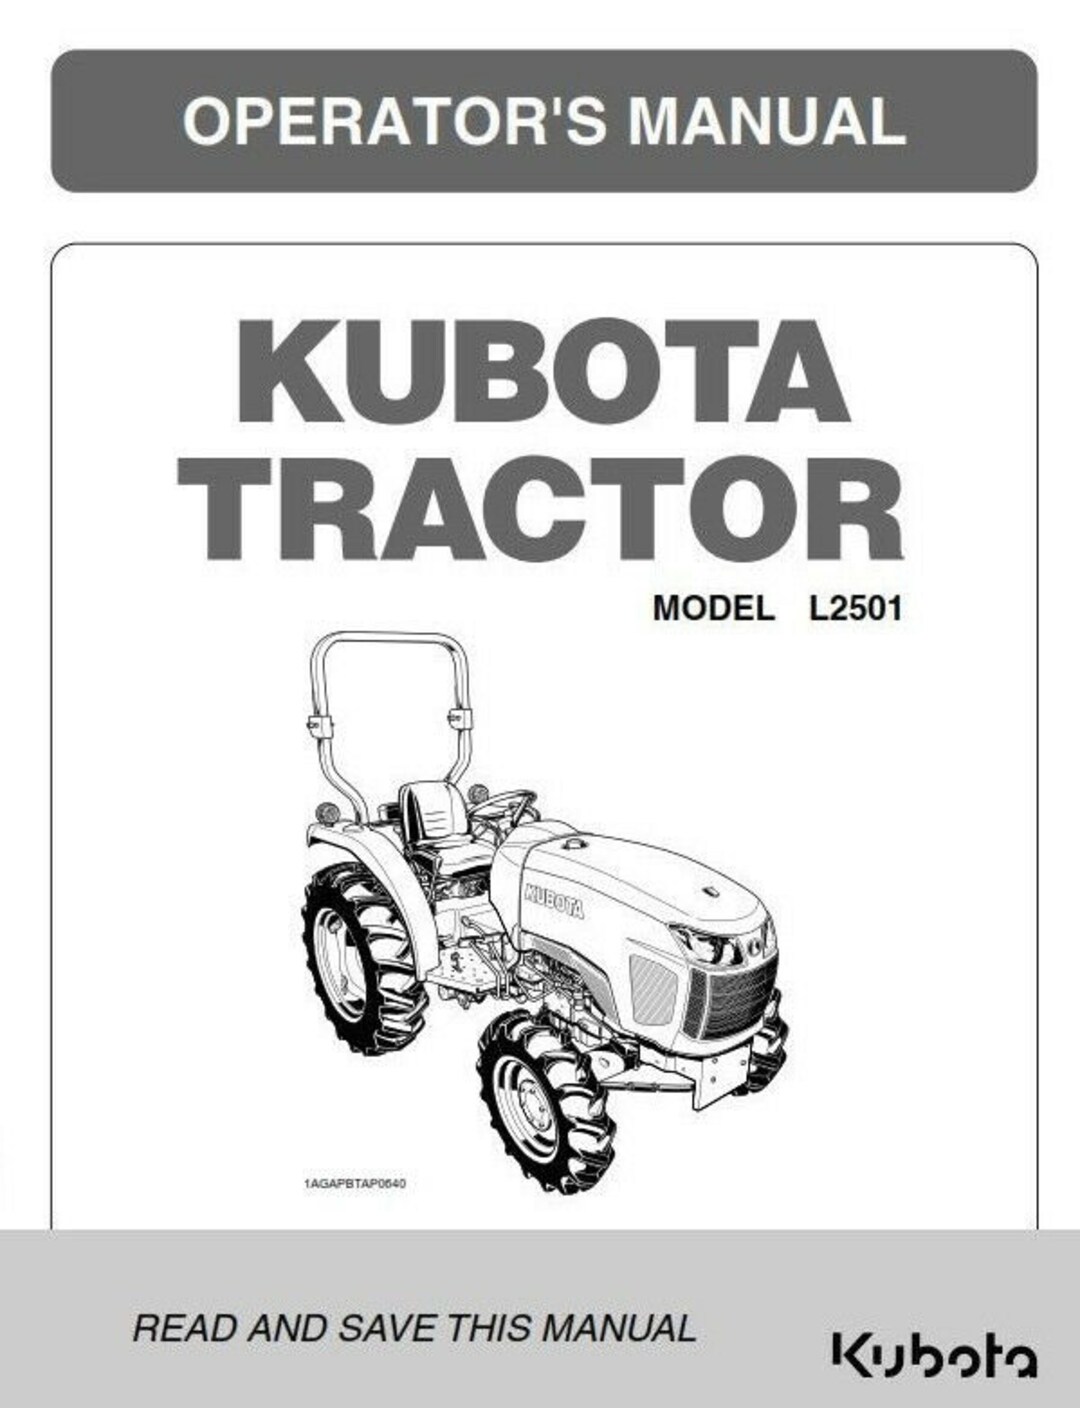 Get the Best Deals on Kubota U35 4 Tractor: Your Ultimate Guide